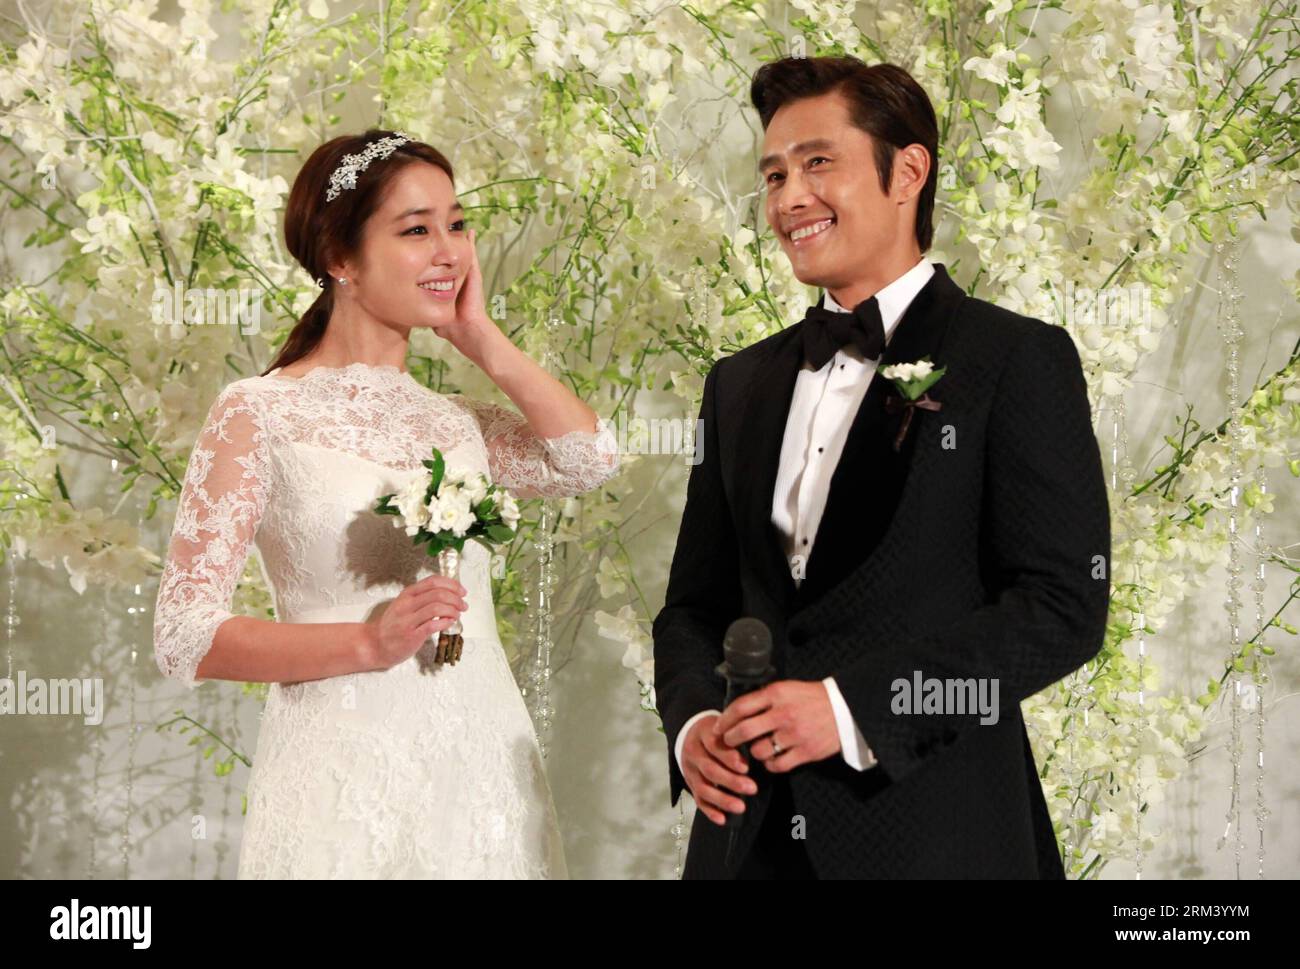 Bildnummer: 60347231  Datum: 10.08.2013  Copyright: imago/Xinhua South Korean actor Lee Byung-hun (R) and his wife Lee Min-jung attend a news conference before their wedding in Seoul, capital of South Korea, on Aug. 10, 2013. (Xinhua/Park Jin-hee) (syq) SOUTH KOREA-SEOUL-LEE BYUNG-HUN-LEE MIN-JUNG-WEDDING PUBLICATIONxNOTxINxCHN People xcb x0x 2013 quer     60347231 Date 10 08 2013 Copyright Imago XINHUA South Korean Actor Lee Byung HUN r and His wife Lee Min Young attend a News Conference Before their Wedding in Seoul Capital of South Korea ON Aug 10 2013 XINHUA Park Jin Hee  South Korea Seoul Stock Photo